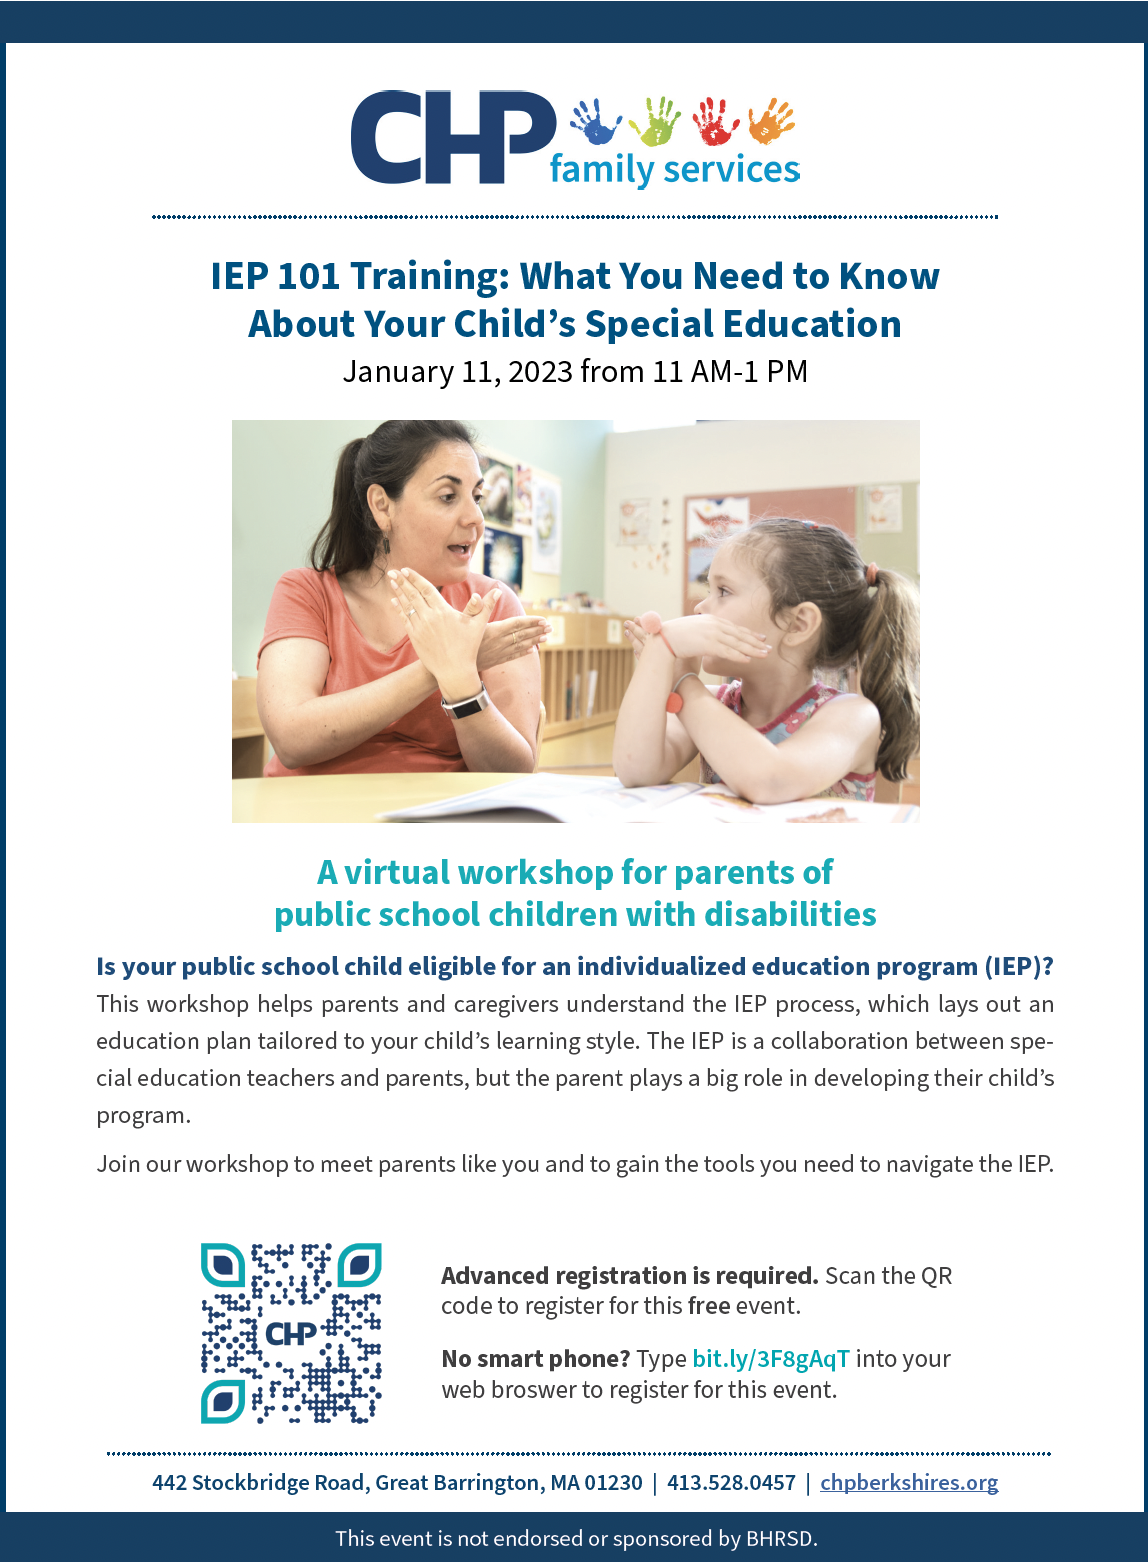 iep 101 poster for January 23 event